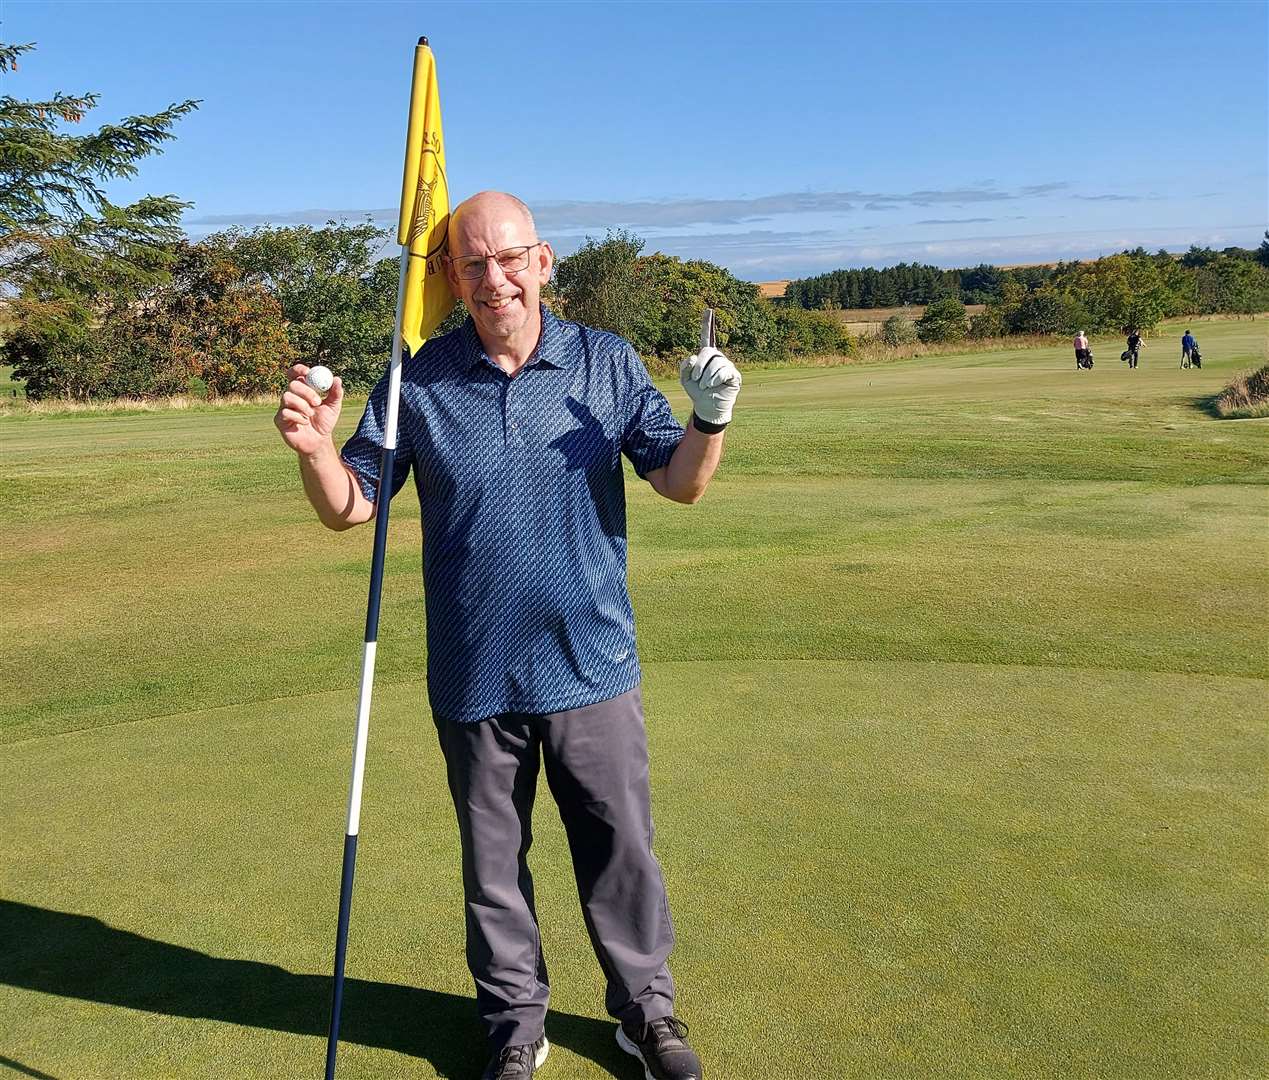 Billy at the fifth where he achieved a hole in one.